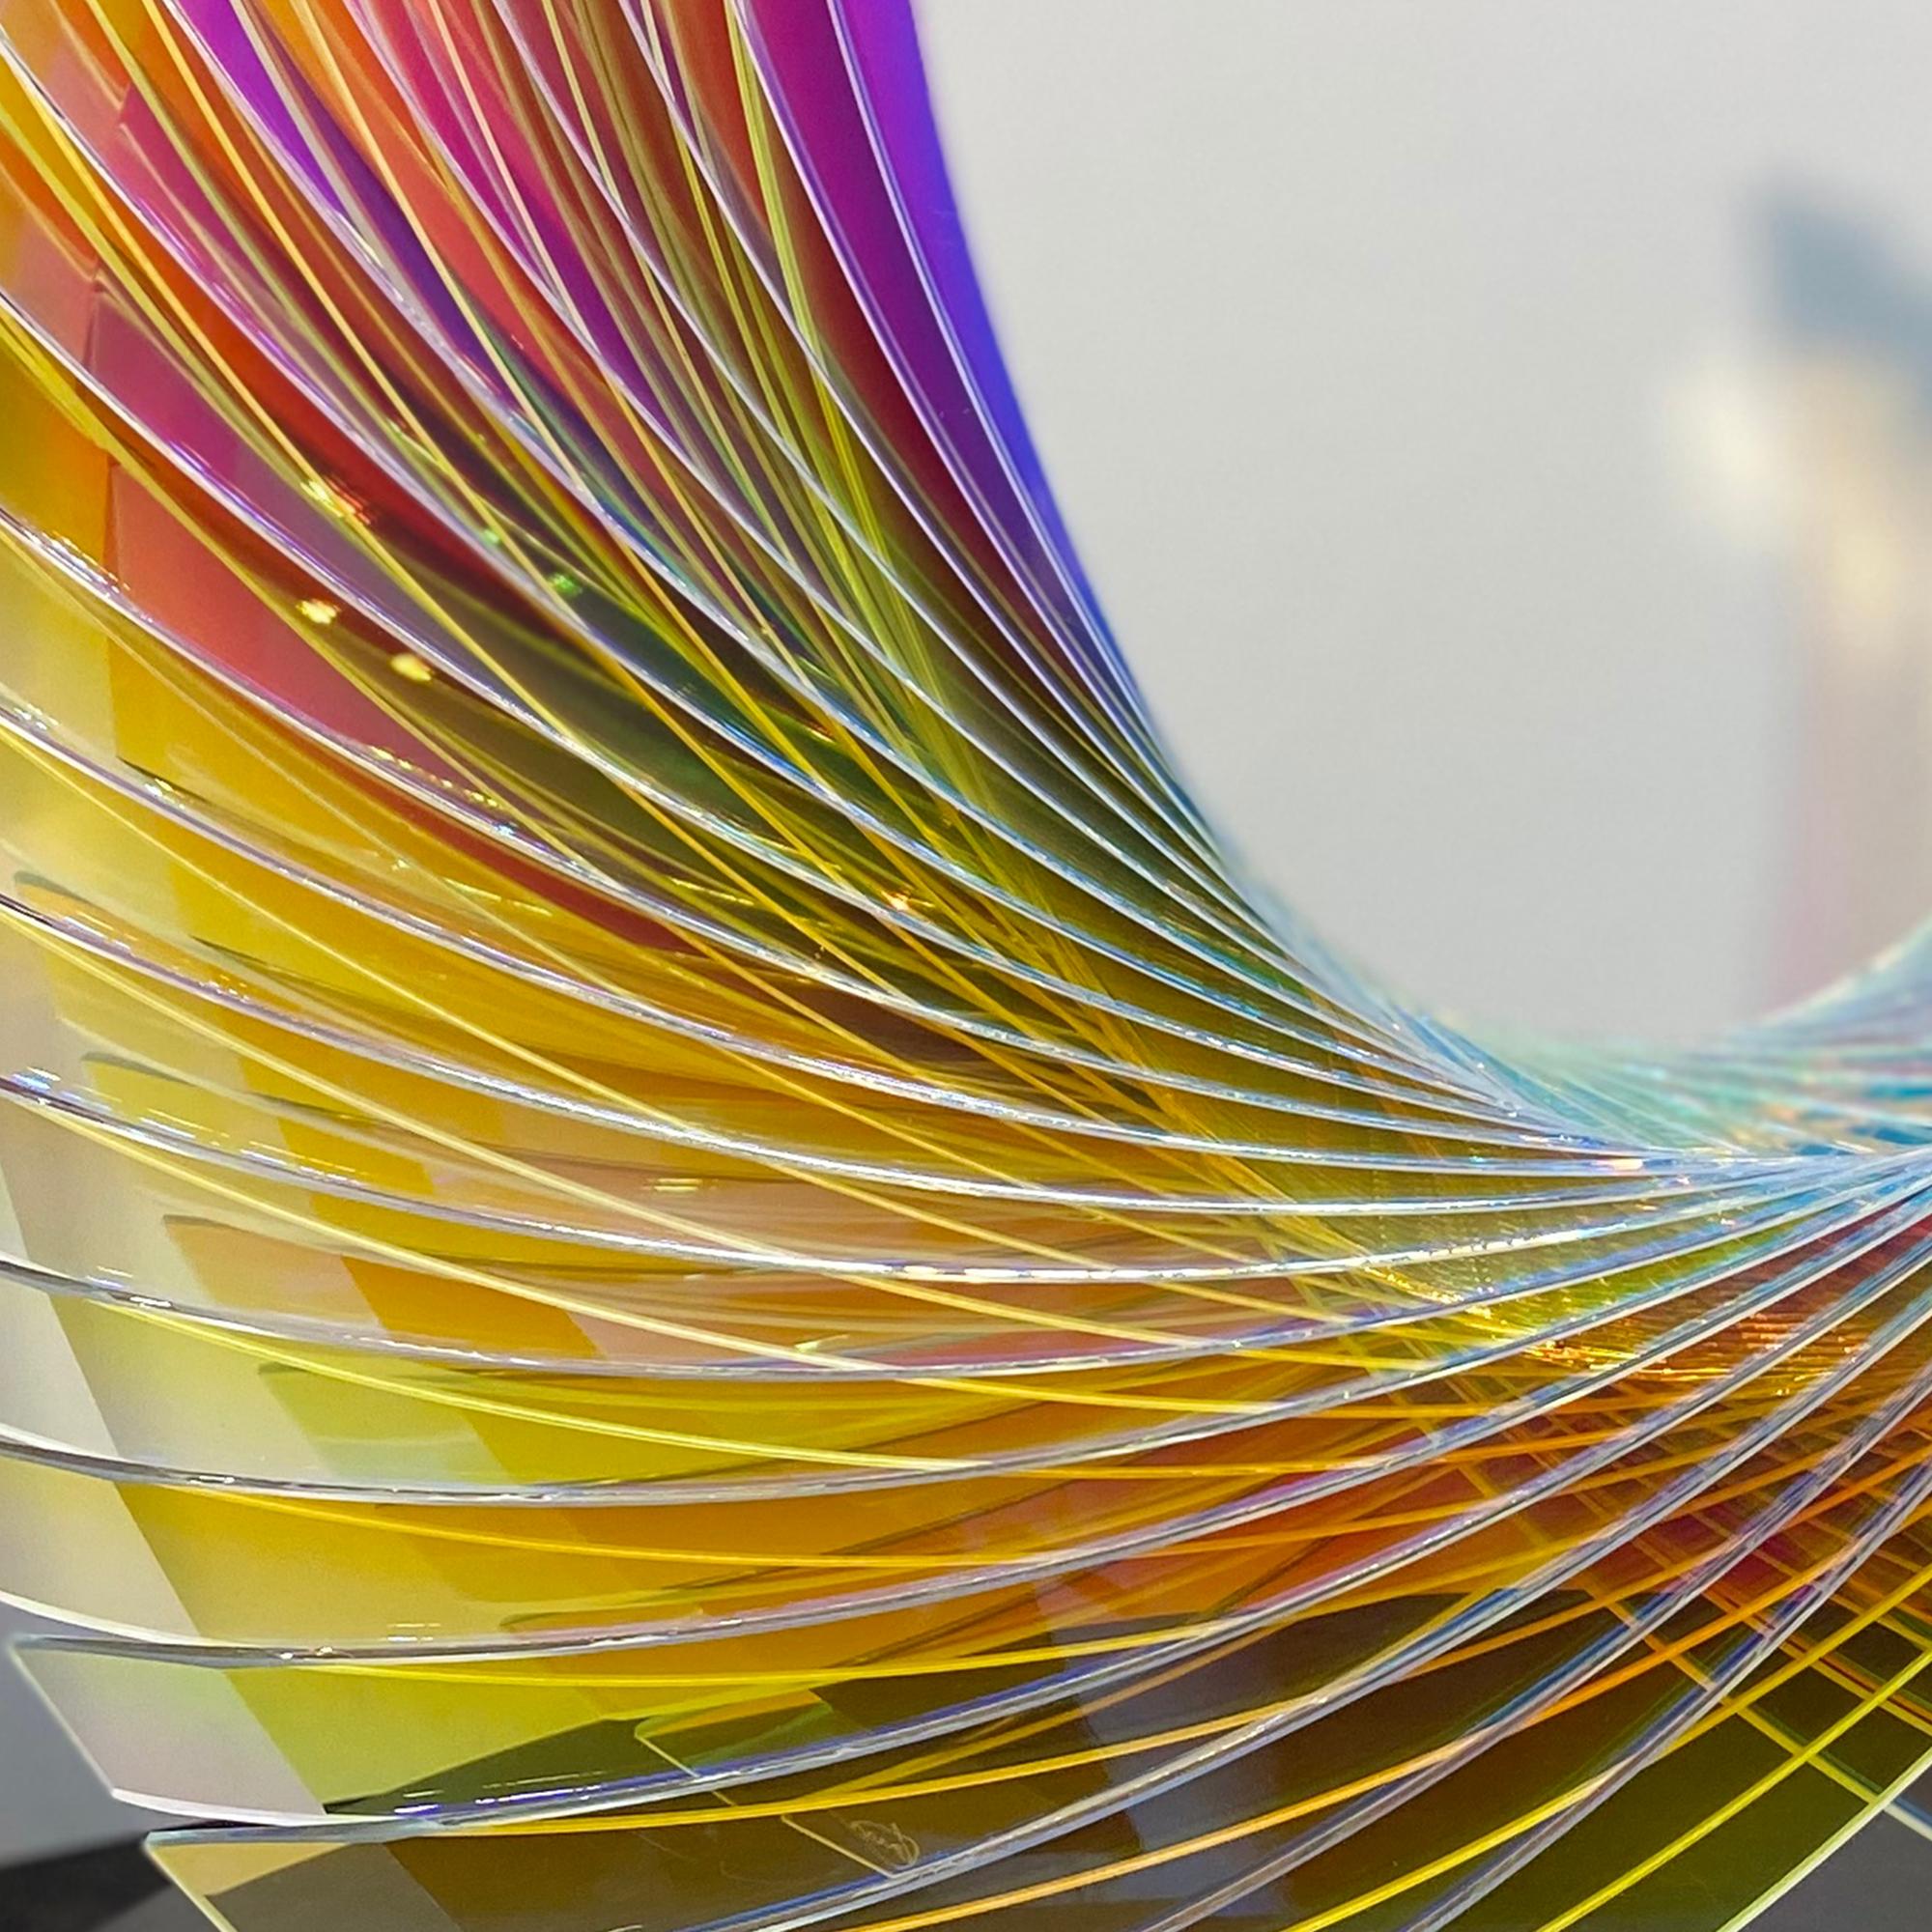 Starfire Sunburst Dichroic Wings’ is an abstracted glass sculpture featuring brilliant multi color dichroic glass. The sculpture strikes beautiful simplicity with its intertwining lines, along with its inspired depiction of wings. The subtle use of